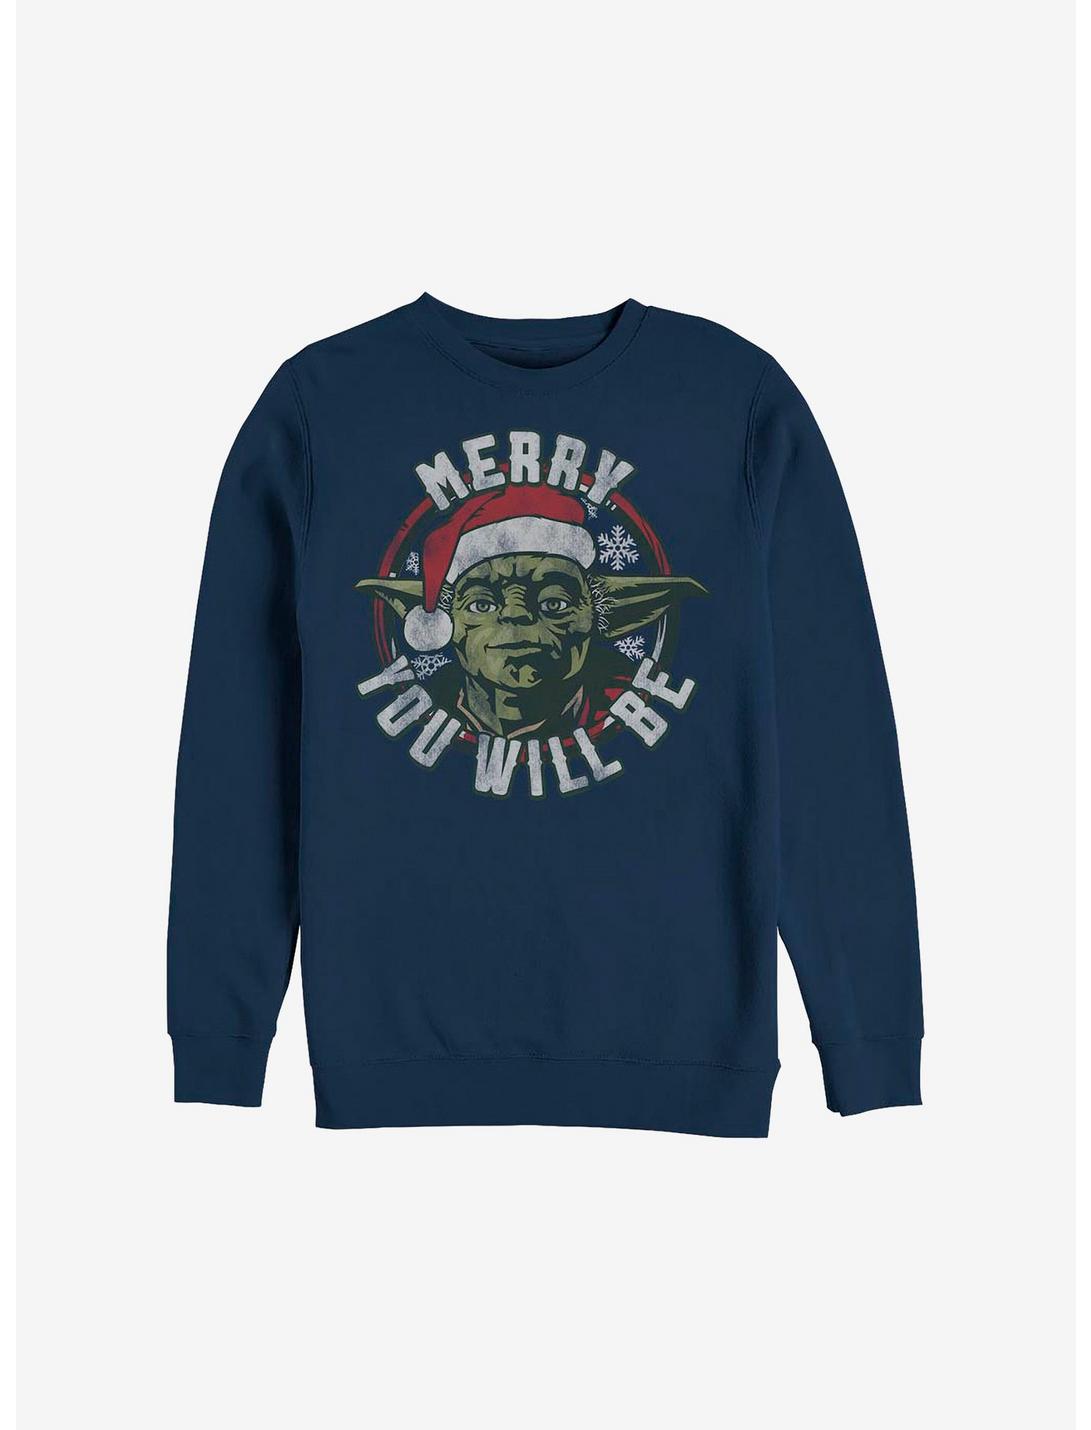 Star Wars Merry You Will Be Holiday Sweatshirt, NAVY, hi-res